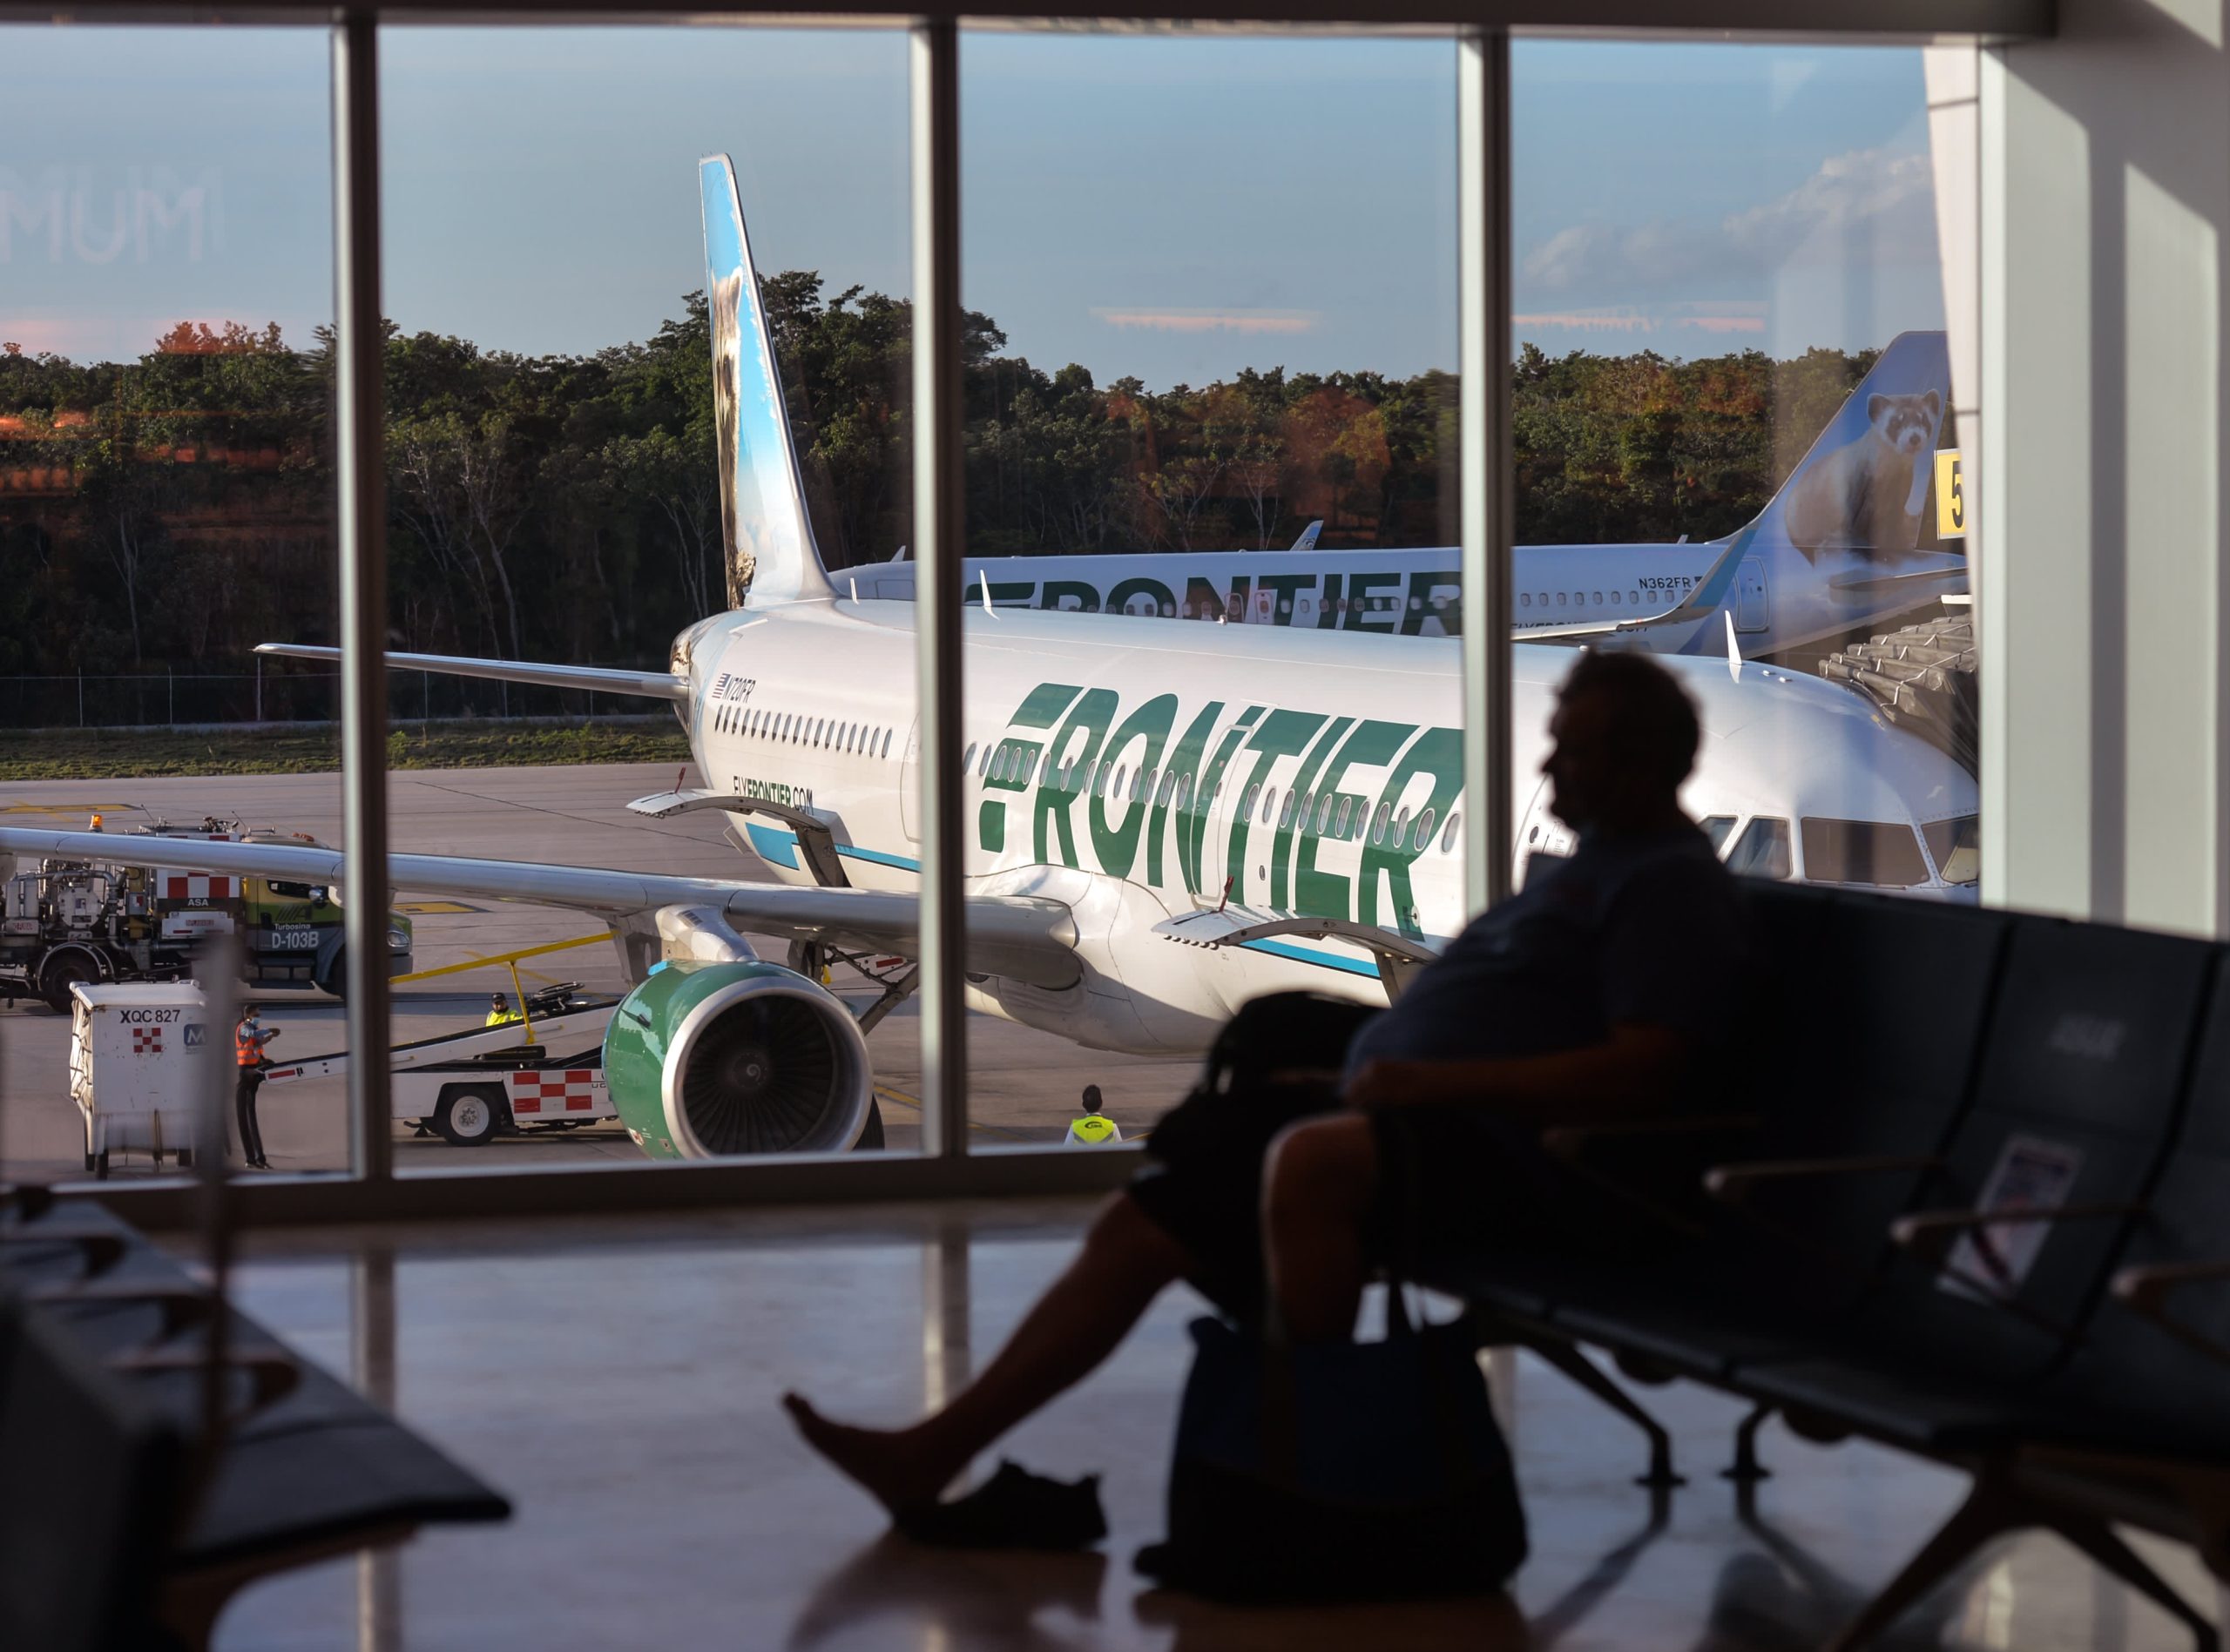 Frontier Airlines CEO Criticizes Alleged Abuse of Wheelchair Services by Passengers